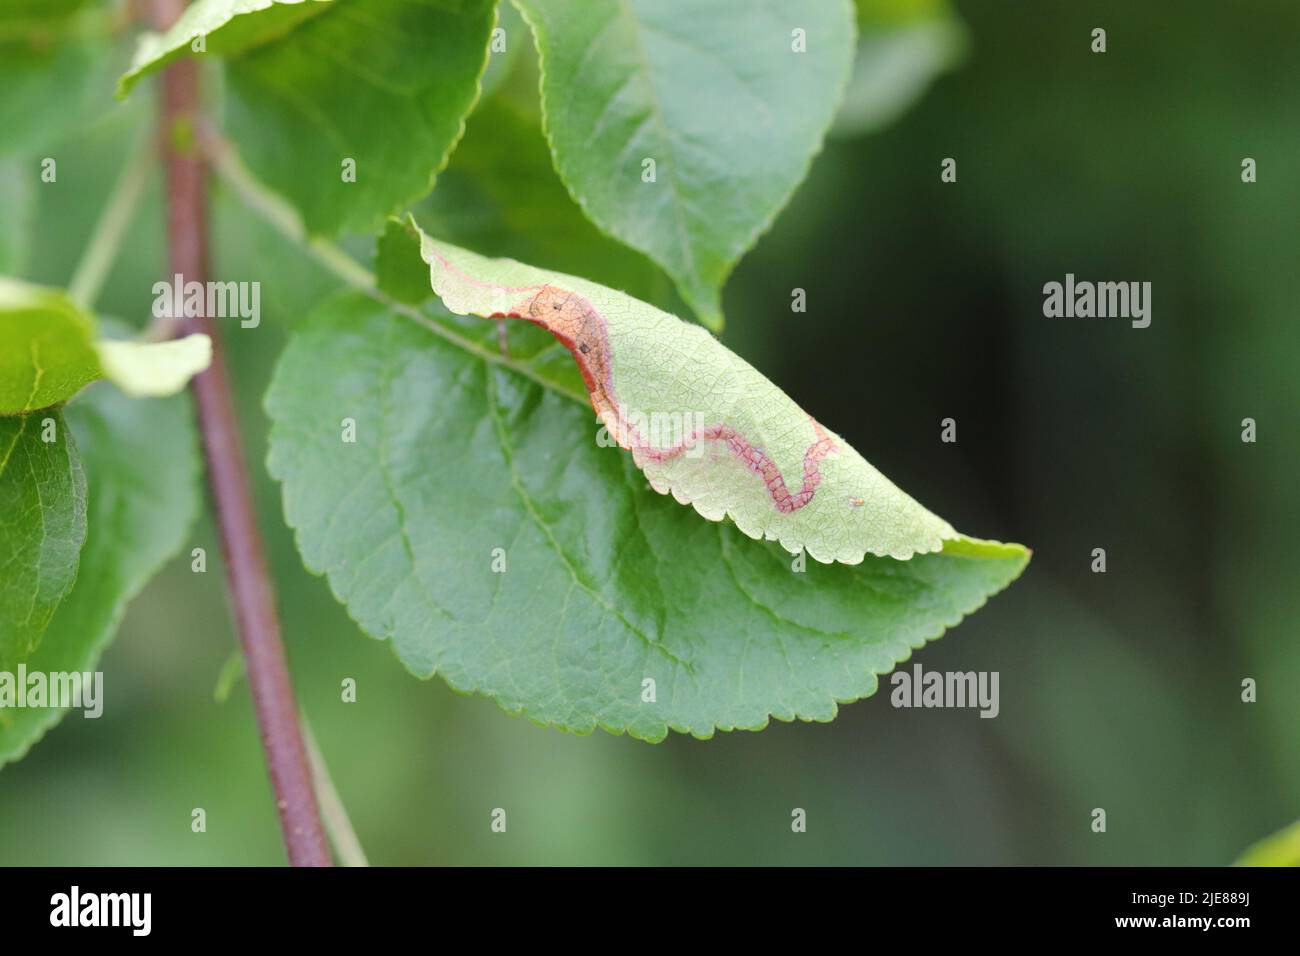 leafminer. Foraging on an apple tree leaf in the garden. Stock Photo